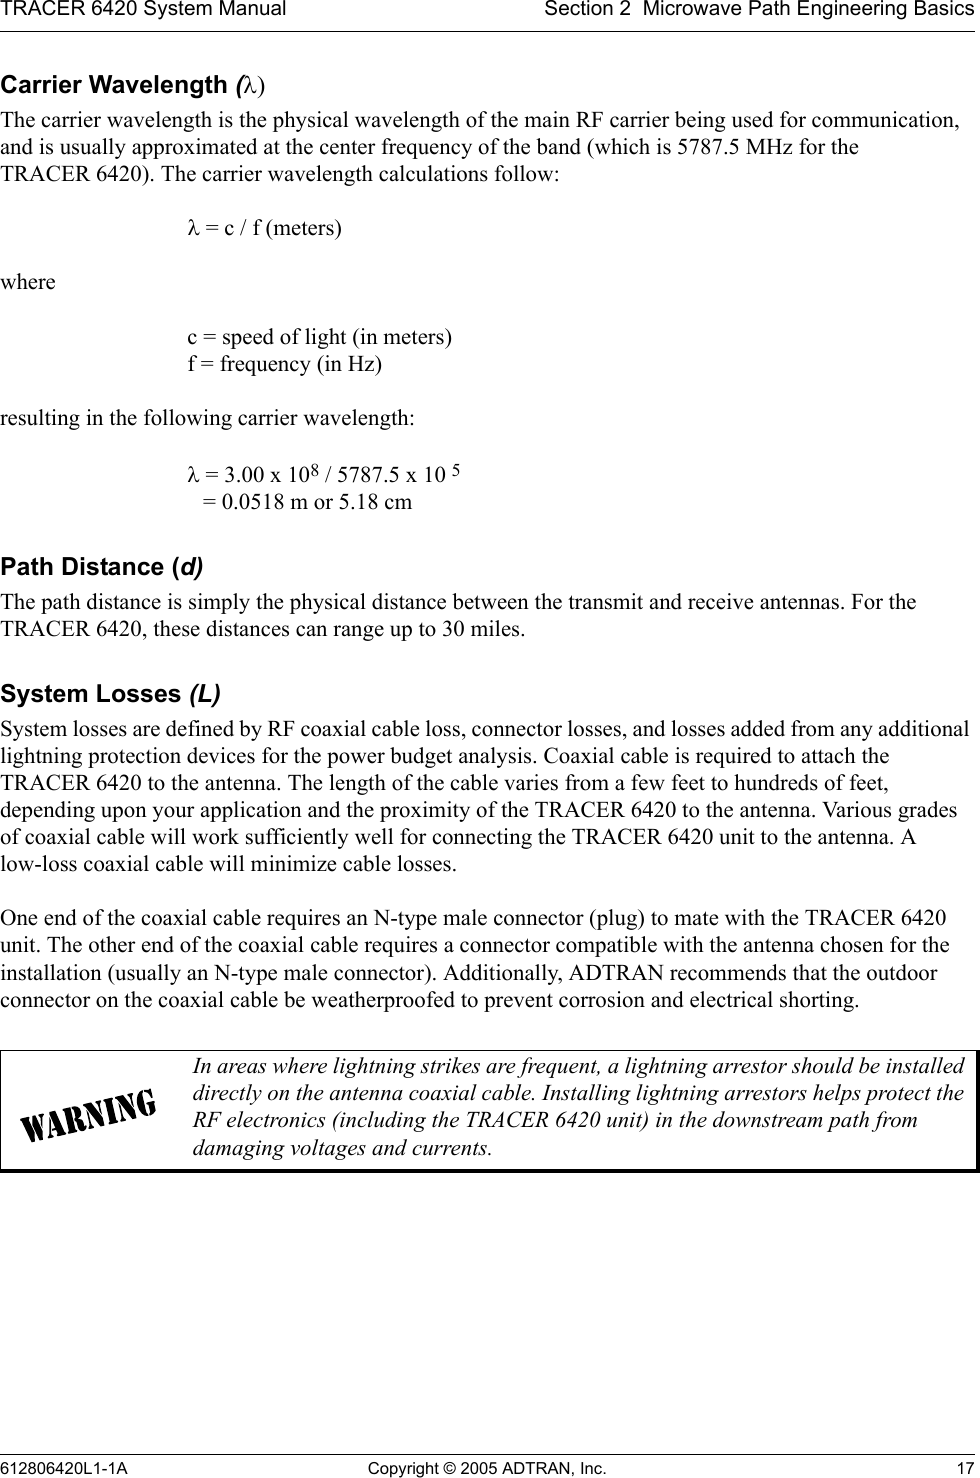 TRACER 6420 System Manual Section 2  Microwave Path Engineering Basics612806420L1-1A Copyright © 2005 ADTRAN, Inc. 17Carrier Wavelength (λ)The carrier wavelength is the physical wavelength of the main RF carrier being used for communication, and is usually approximated at the center frequency of the band (which is 5787.5 MHz for the  TRACER 6420). The carrier wavelength calculations follow:λ = c / f (meters)where c = speed of light (in meters) f = frequency (in Hz)resulting in the following carrier wavelength:λ = 3.00 x 108 / 5787.5 x 10 5  = 0.0518 m or 5.18 cmPath Distance (d)The path distance is simply the physical distance between the transmit and receive antennas. For the TRACER 6420, these distances can range up to 30 miles. System Losses (L)System losses are defined by RF coaxial cable loss, connector losses, and losses added from any additional lightning protection devices for the power budget analysis. Coaxial cable is required to attach the TRACER 6420 to the antenna. The length of the cable varies from a few feet to hundreds of feet, depending upon your application and the proximity of the TRACER 6420 to the antenna. Various grades of coaxial cable will work sufficiently well for connecting the TRACER 6420 unit to the antenna. A low-loss coaxial cable will minimize cable losses.One end of the coaxial cable requires an N-type male connector (plug) to mate with the TRACER 6420 unit. The other end of the coaxial cable requires a connector compatible with the antenna chosen for the installation (usually an N-type male connector). Additionally, ADTRAN recommends that the outdoor connector on the coaxial cable be weatherproofed to prevent corrosion and electrical shorting.In areas where lightning strikes are frequent, a lightning arrestor should be installed directly on the antenna coaxial cable. Installing lightning arrestors helps protect the RF electronics (including the TRACER 6420 unit) in the downstream path from damaging voltages and currents.